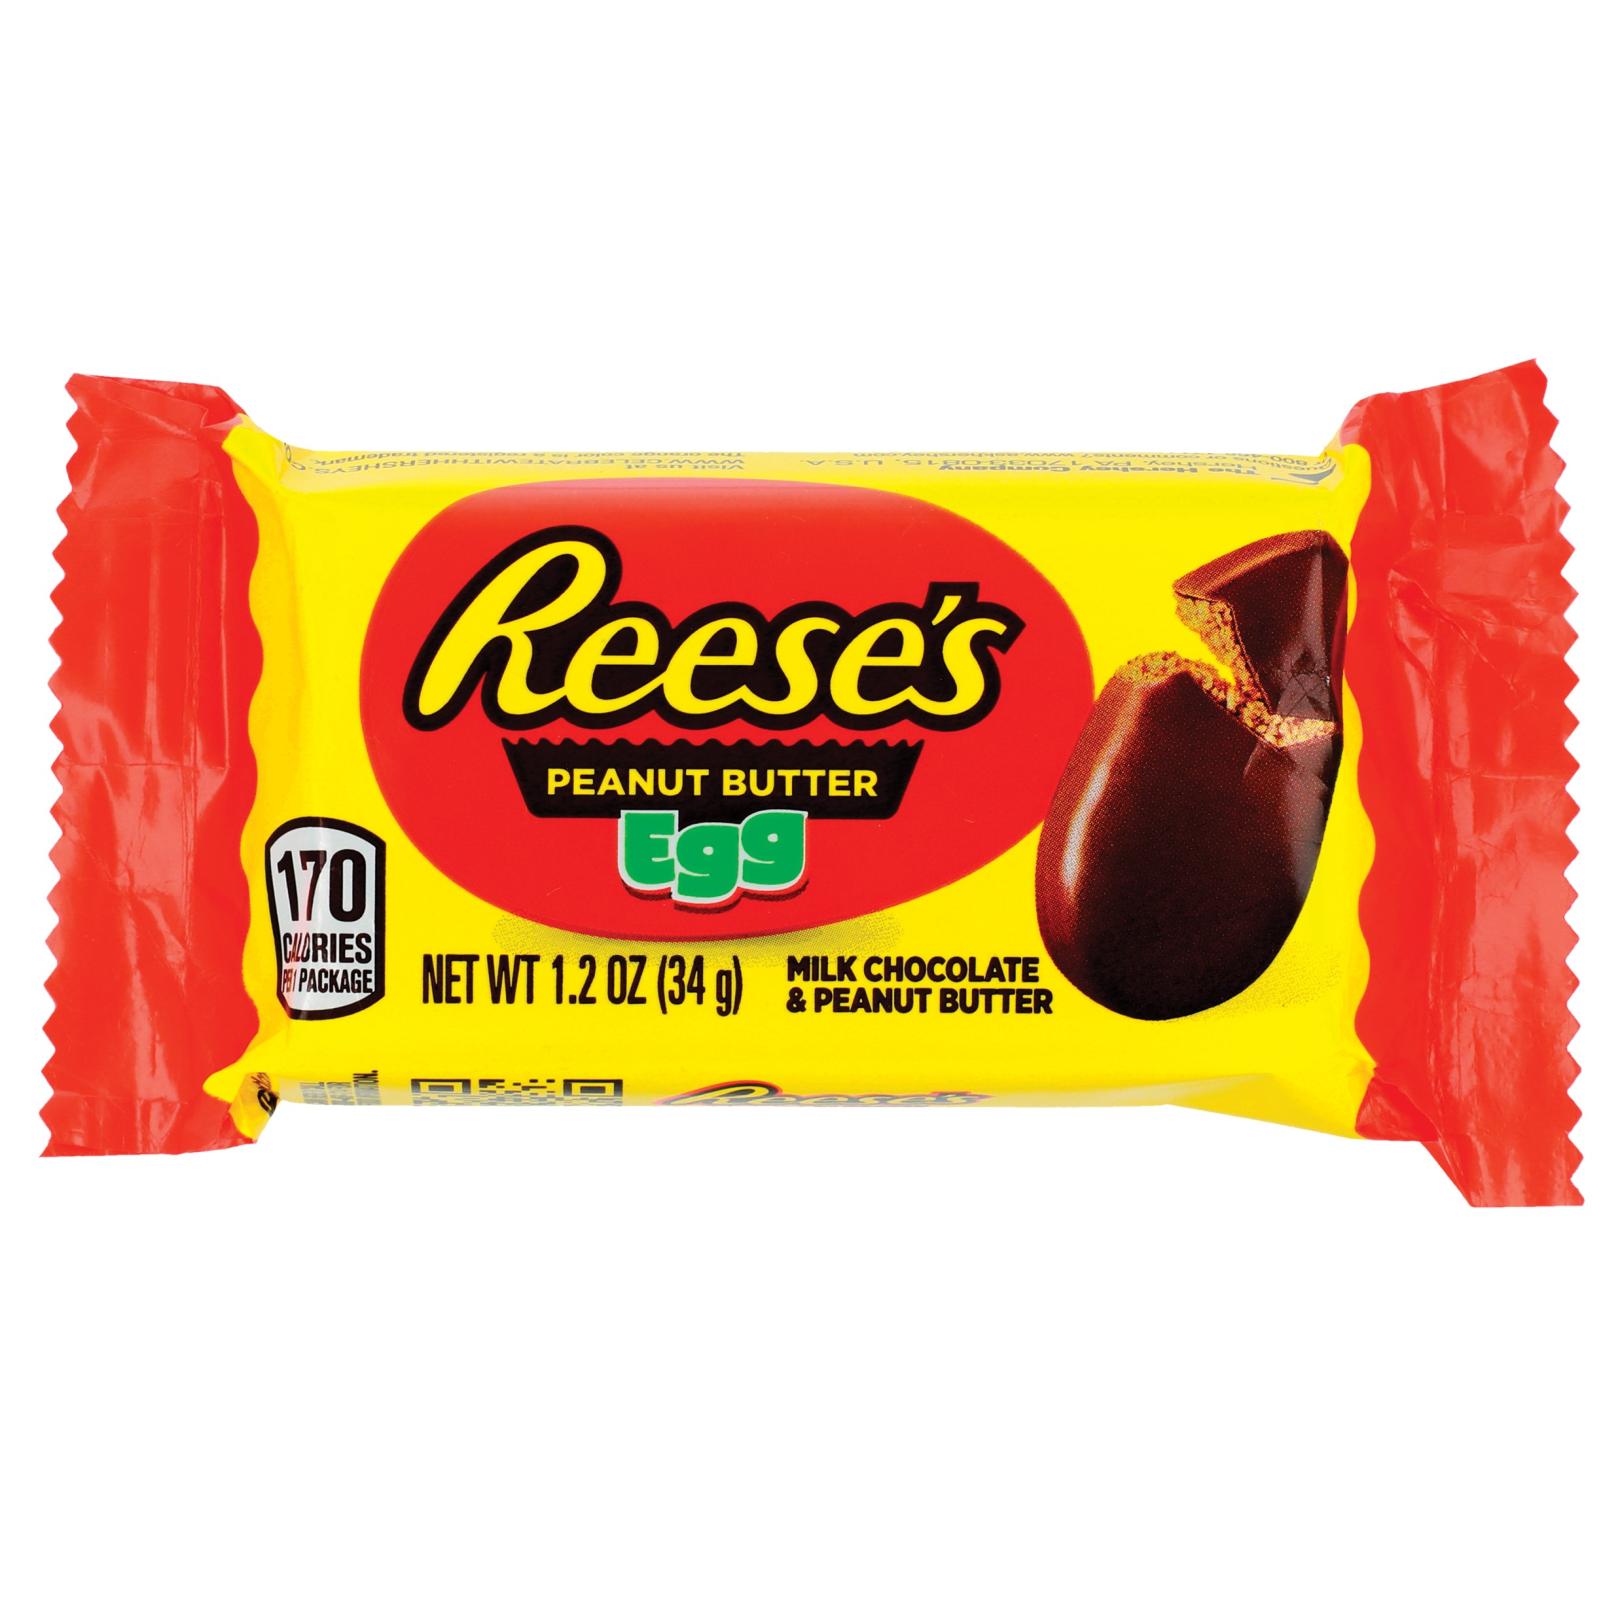 Reese's Peanut Butter Egg package